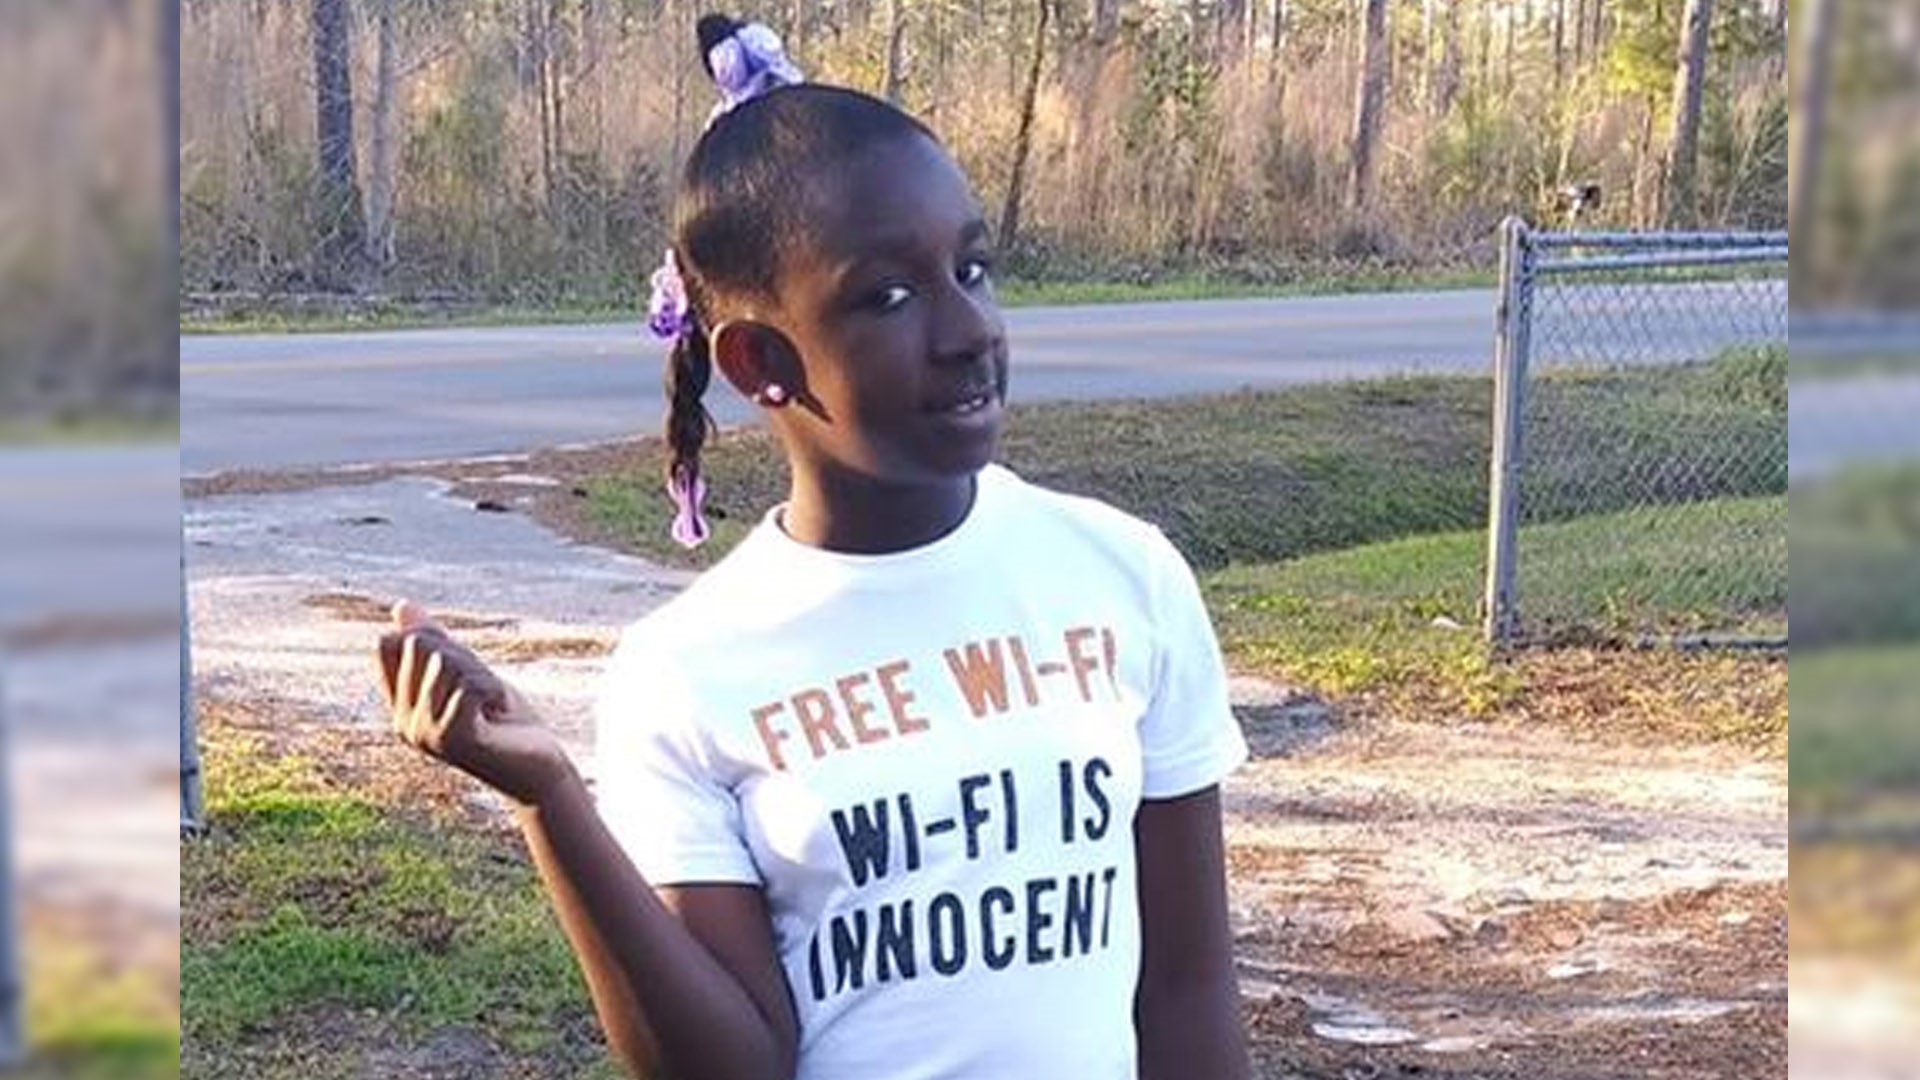 Investigators in South Carolina say it could take weeks to determine what led to the death of fifth grader Raniya Wright inside a Colleton County classroom this week.